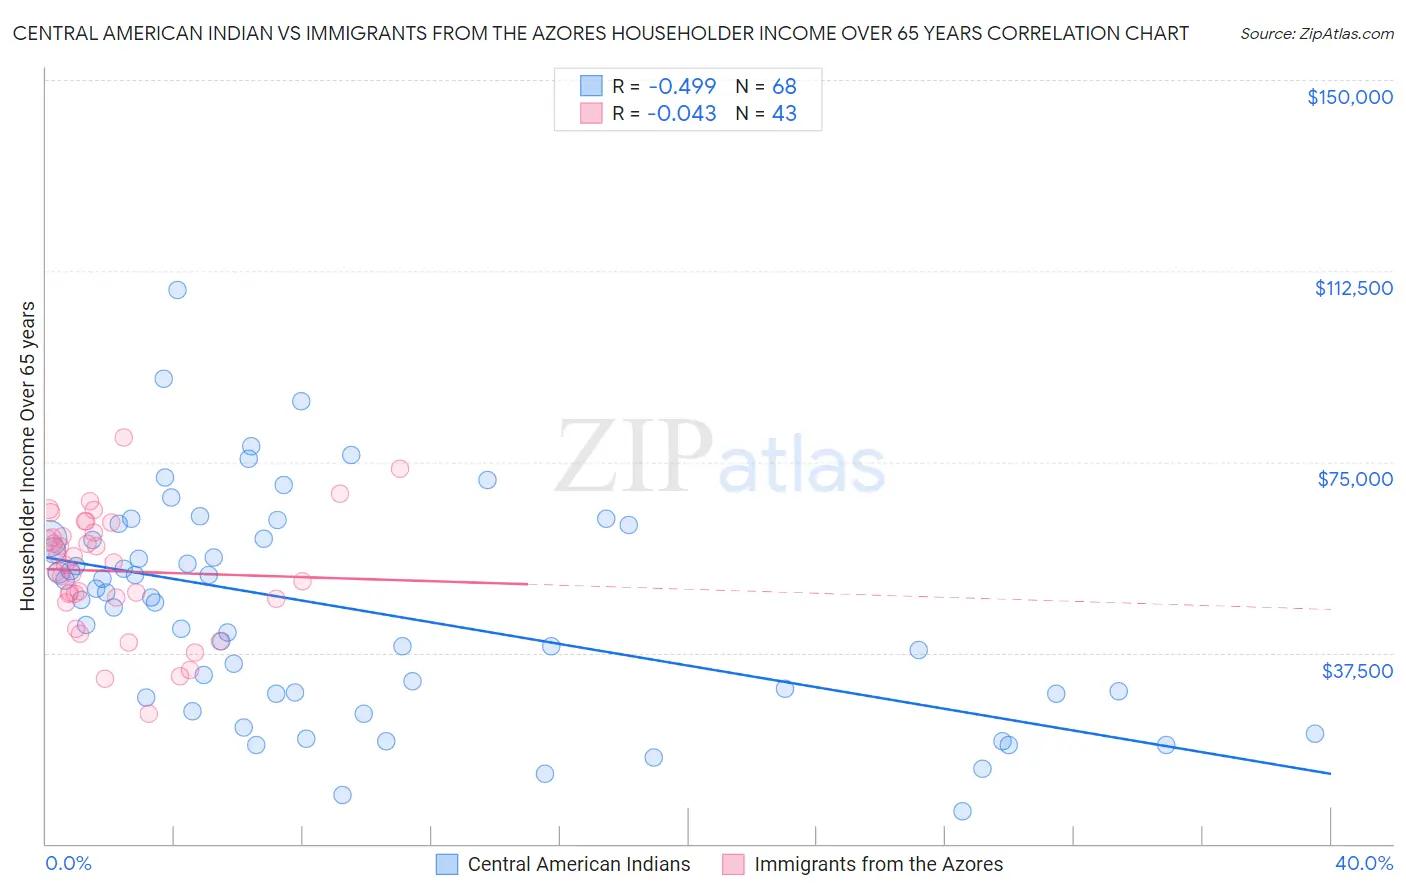 Central American Indian vs Immigrants from the Azores Householder Income Over 65 years